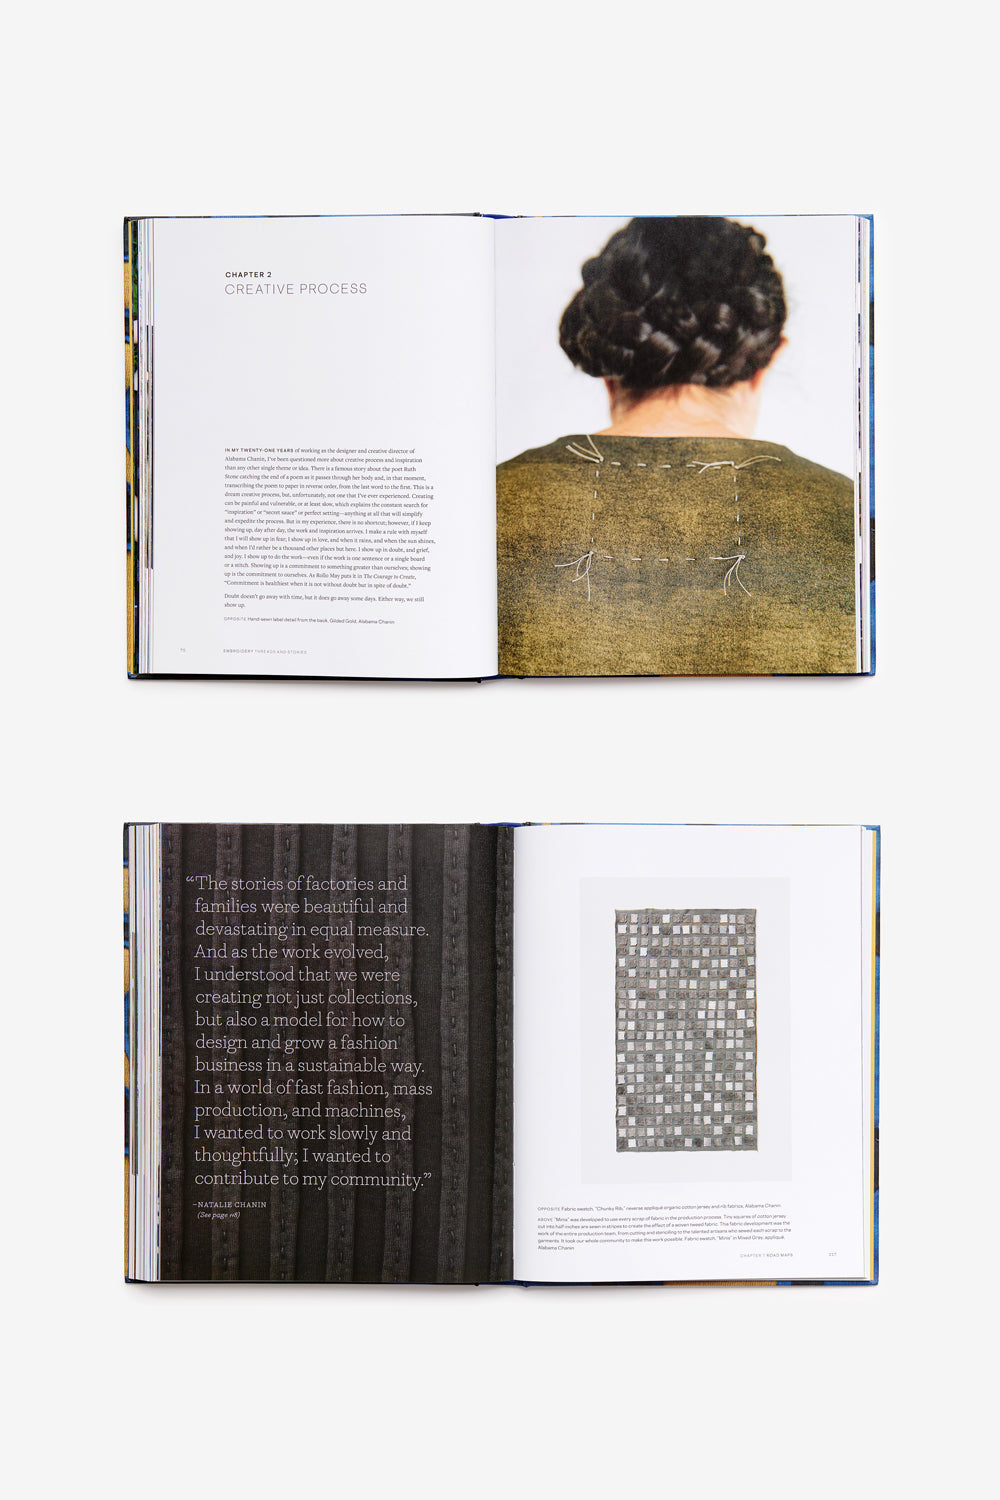 Pages from Embroidery: Threads and Stories by Natalie Chanin